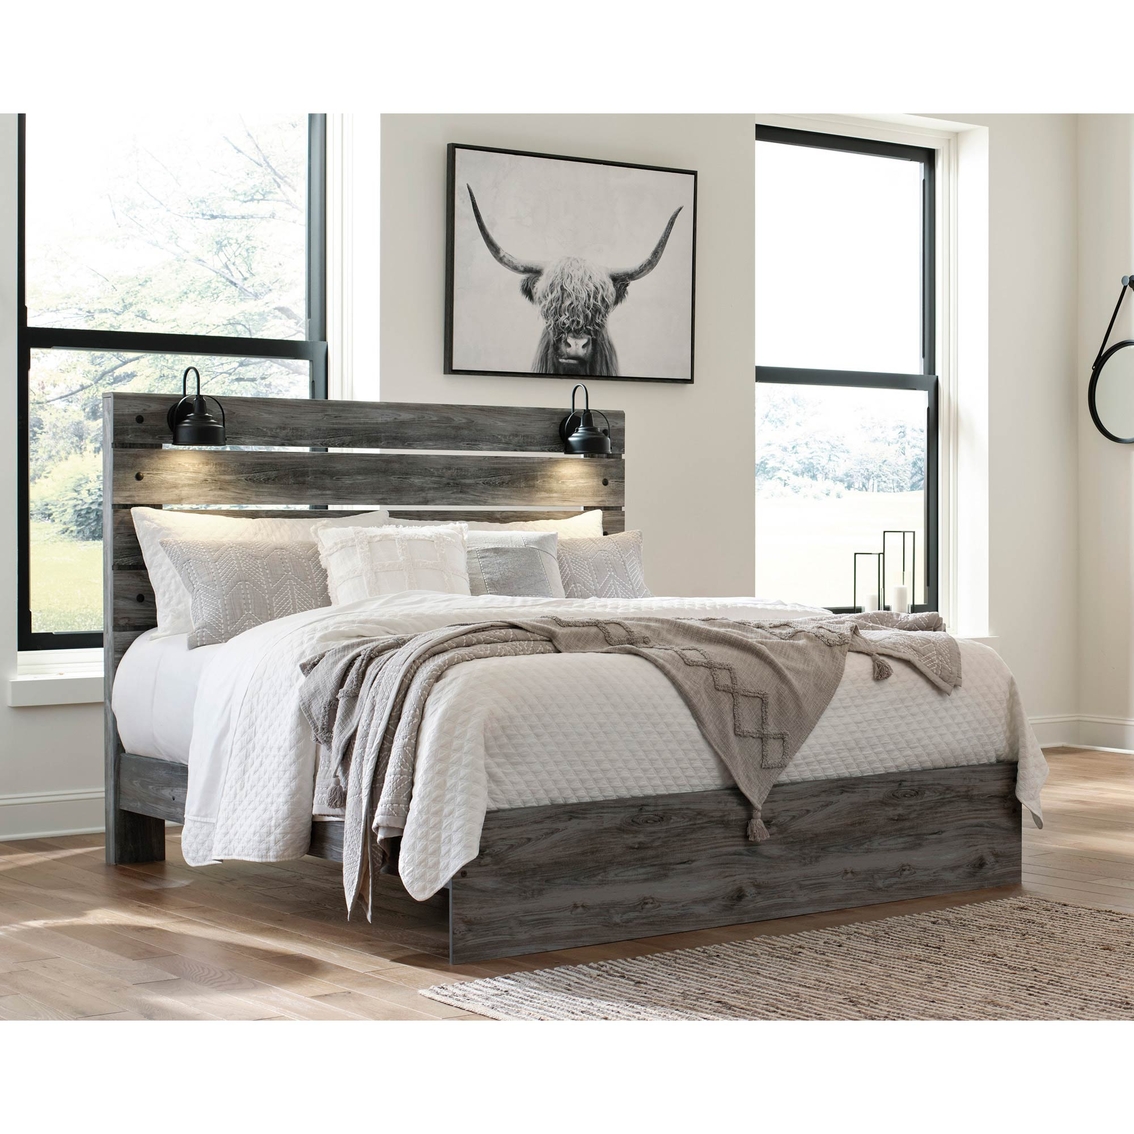 Signature Design by Ashley Baystorm Panel Bed 5 pc. Bedroom Set with Lights - Image 2 of 6